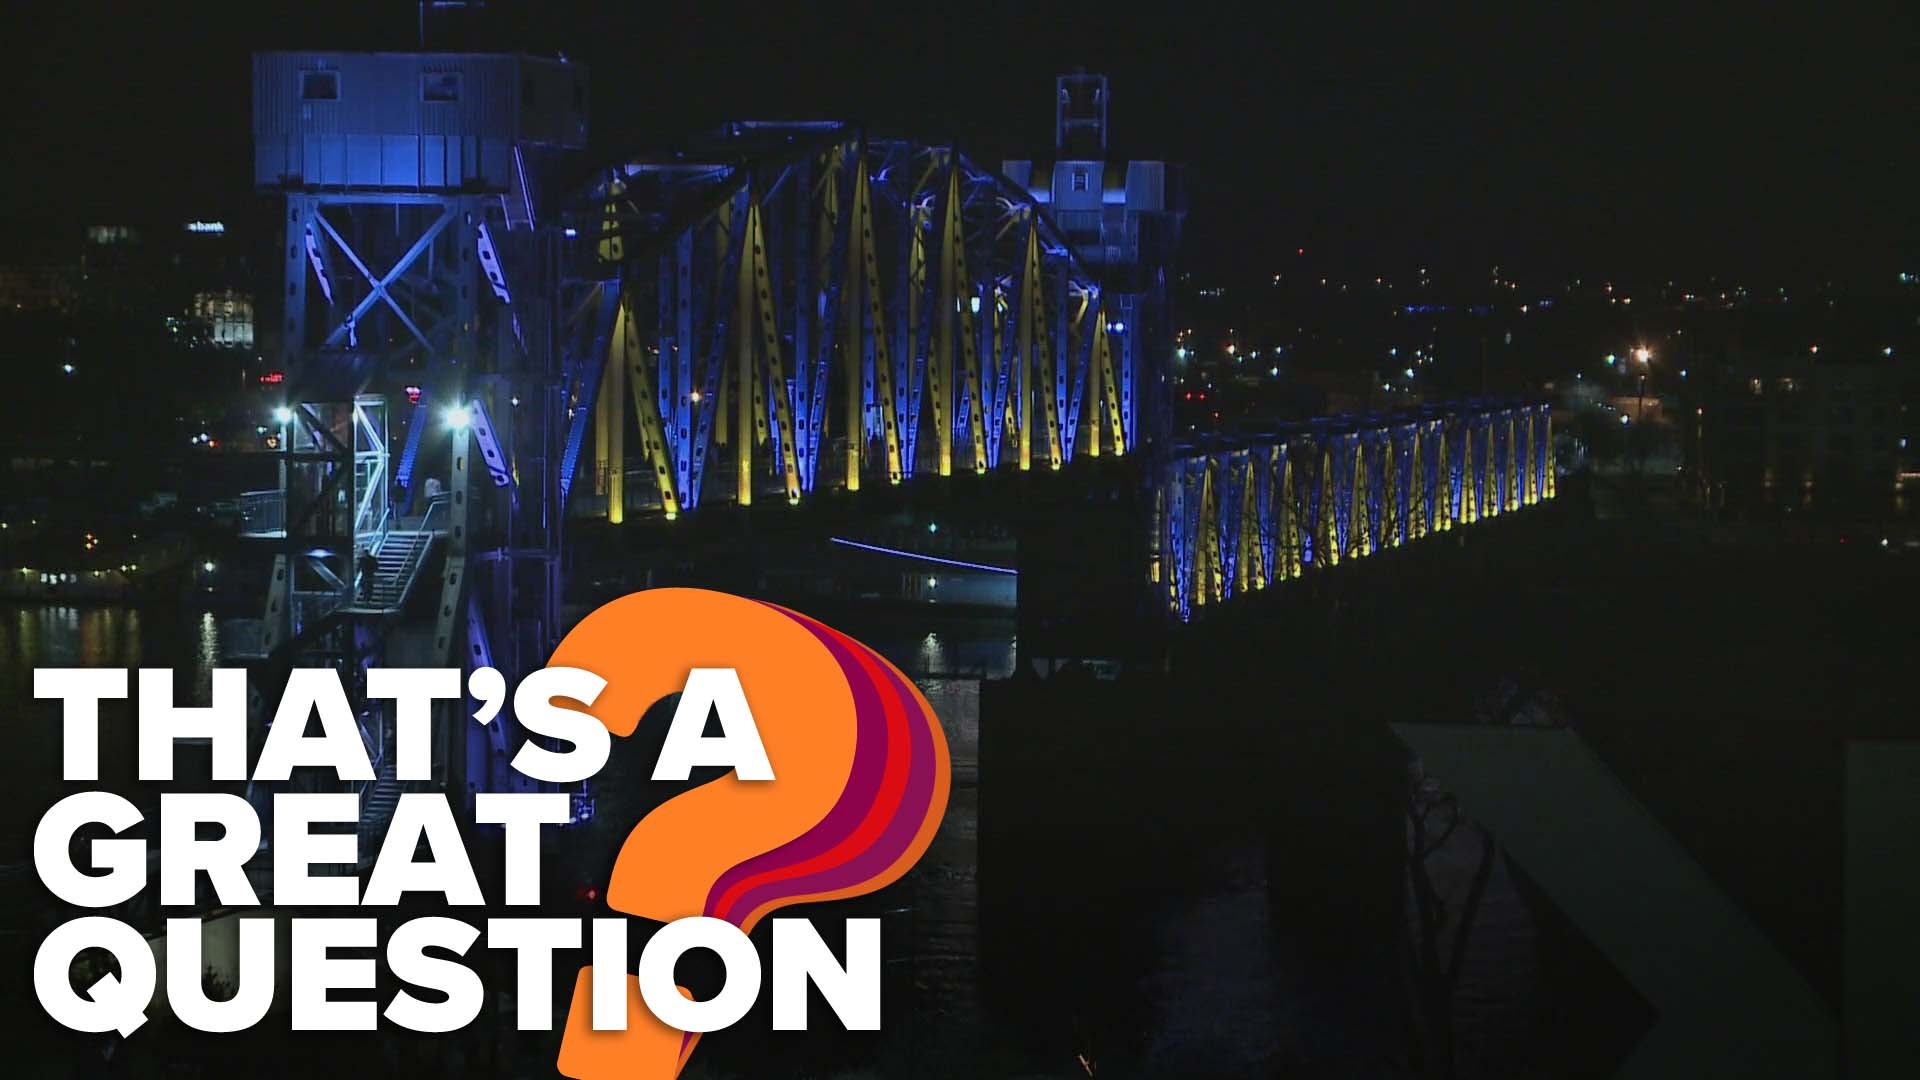 It's one of the most prominent features of Little Rock for people both on the ground and the sky. But, who decides which colors light up the bridge each night?